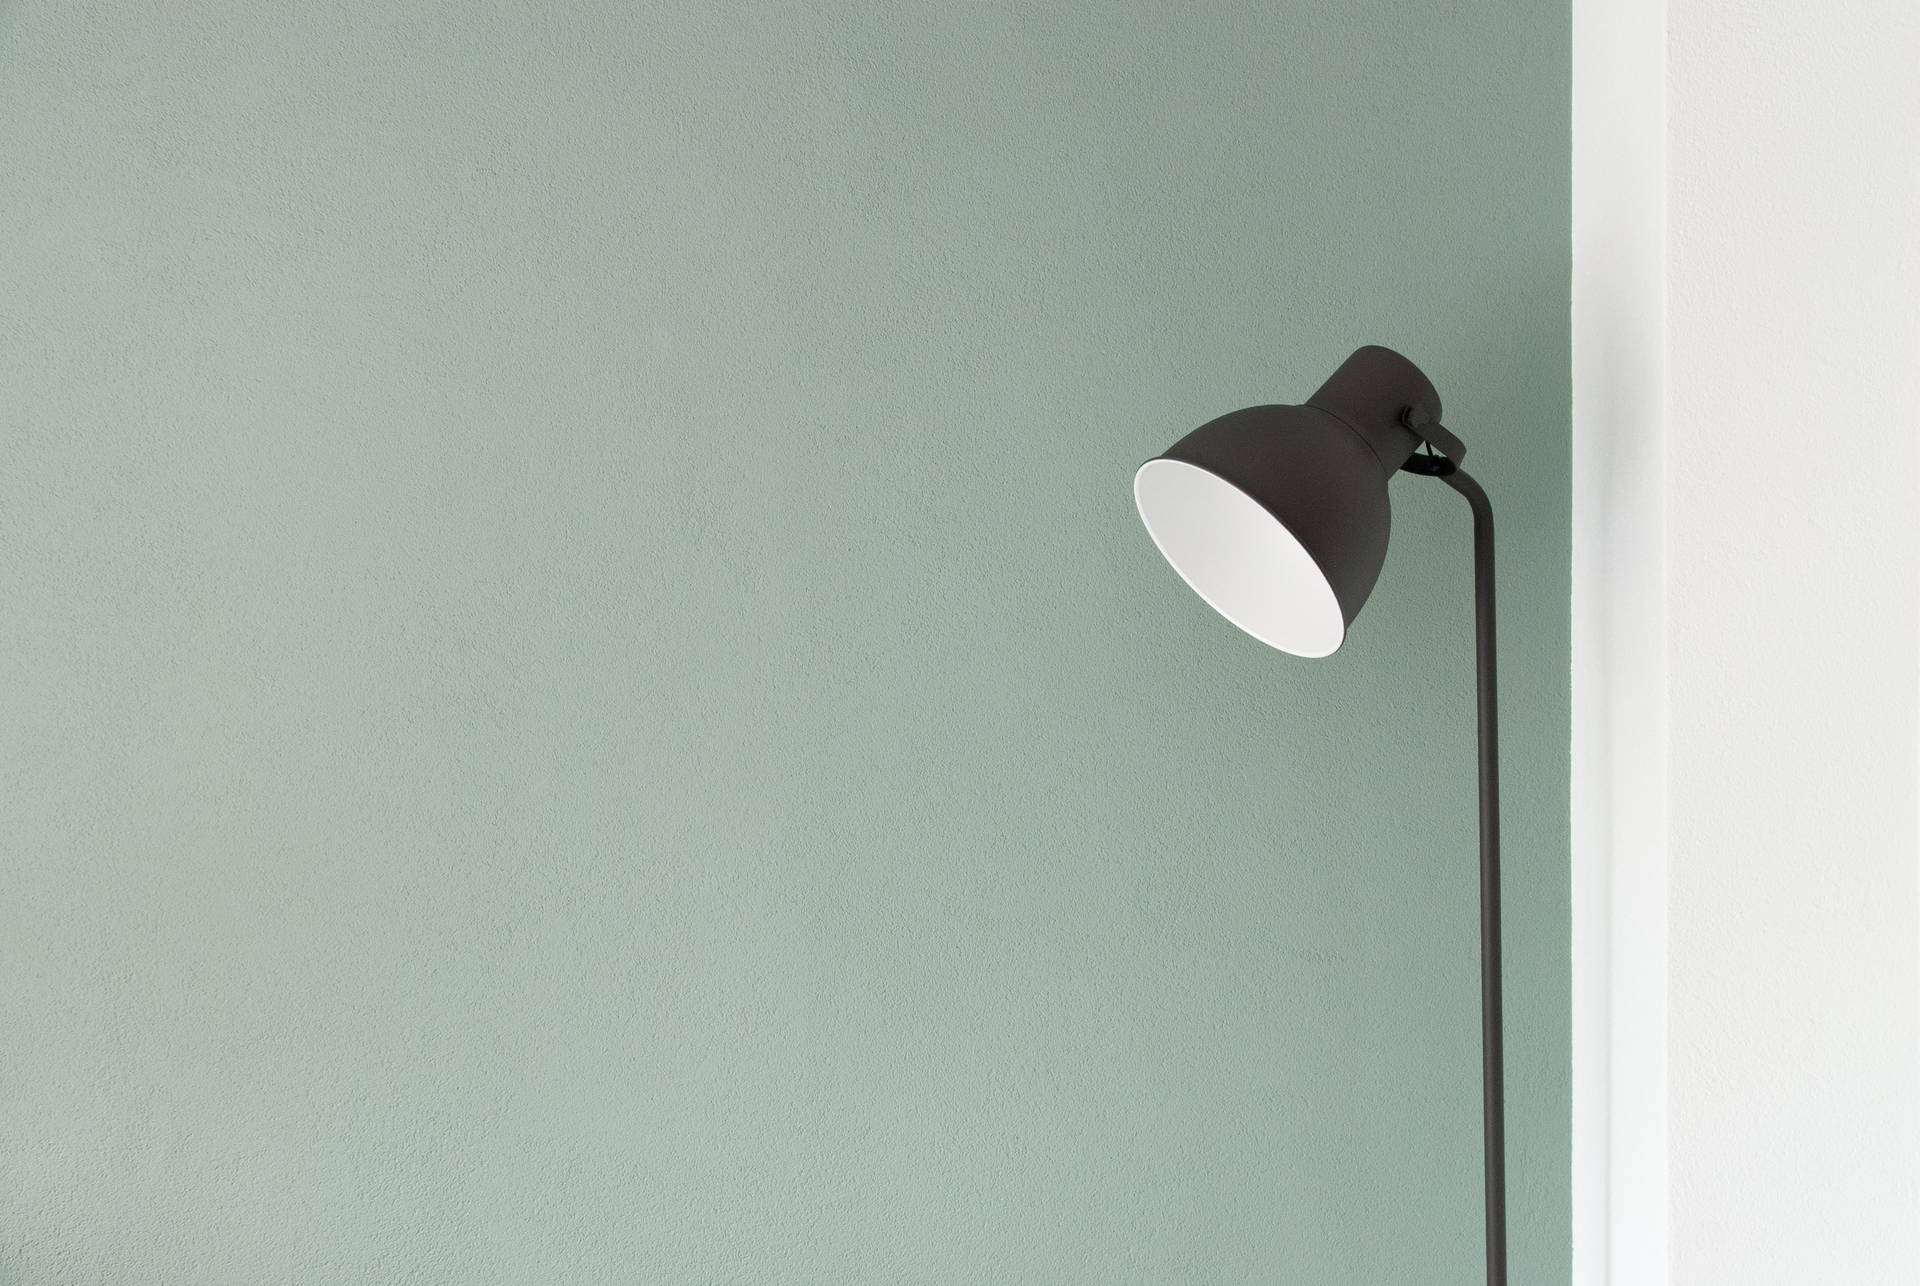 Sage Green Wall And Lamp Background